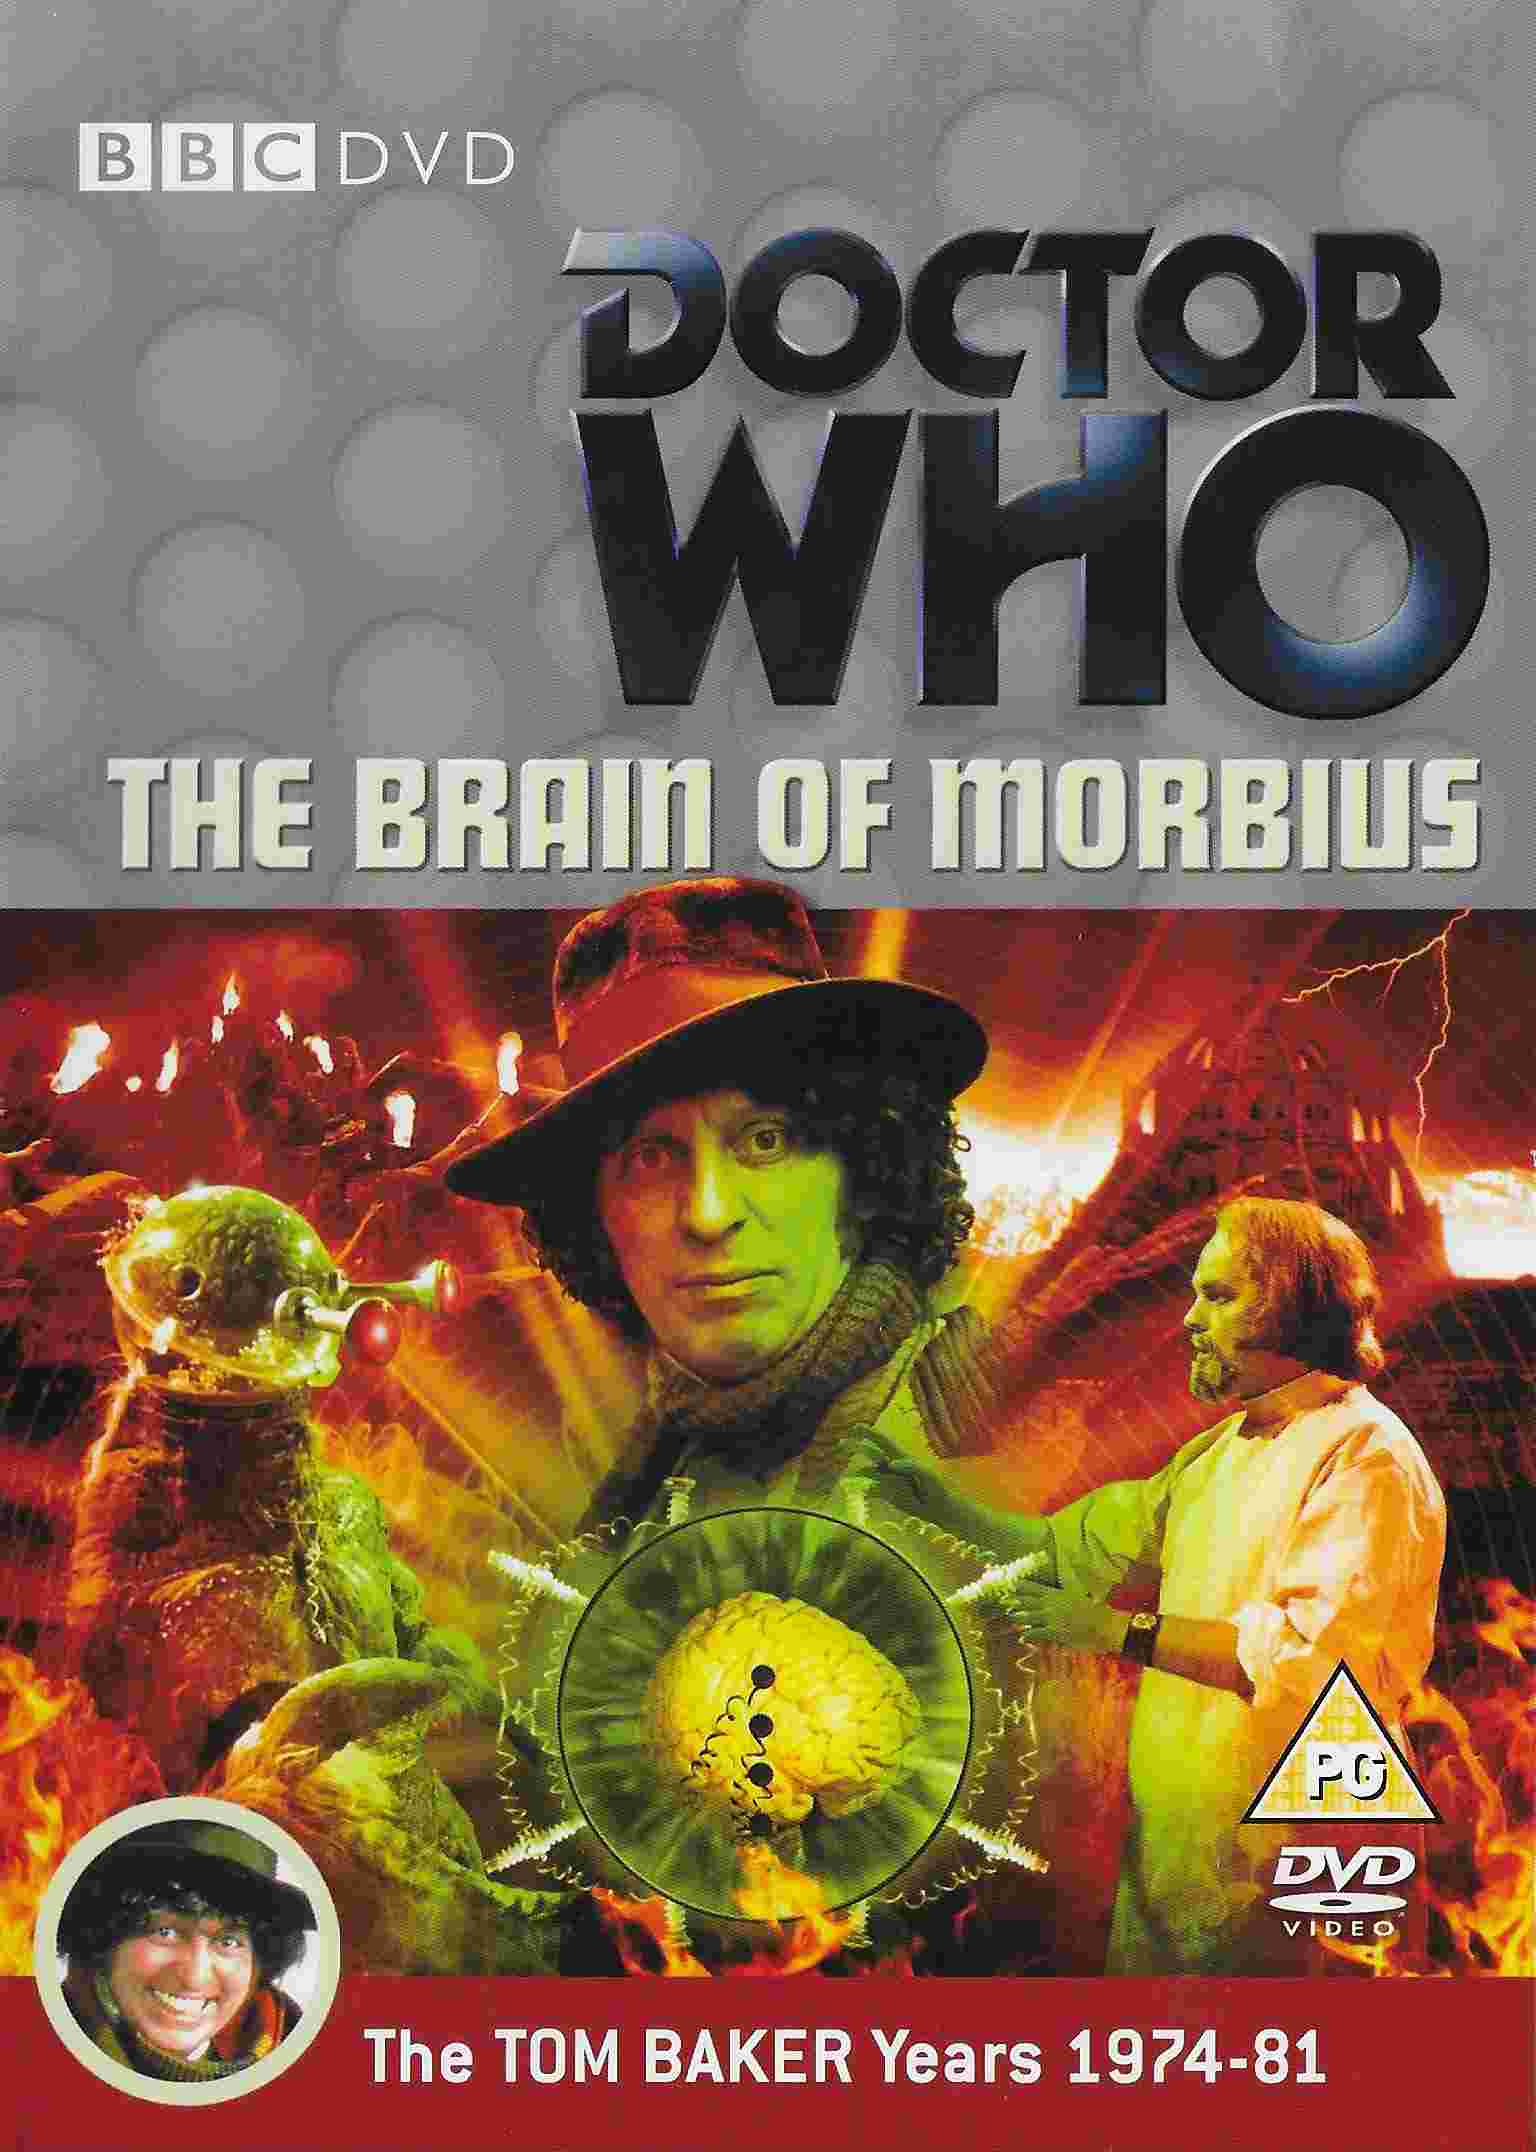 Picture of BBCDVD 1816 Doctor Who - The brain of Morbius by artist Robin Bland from the BBC records and Tapes library